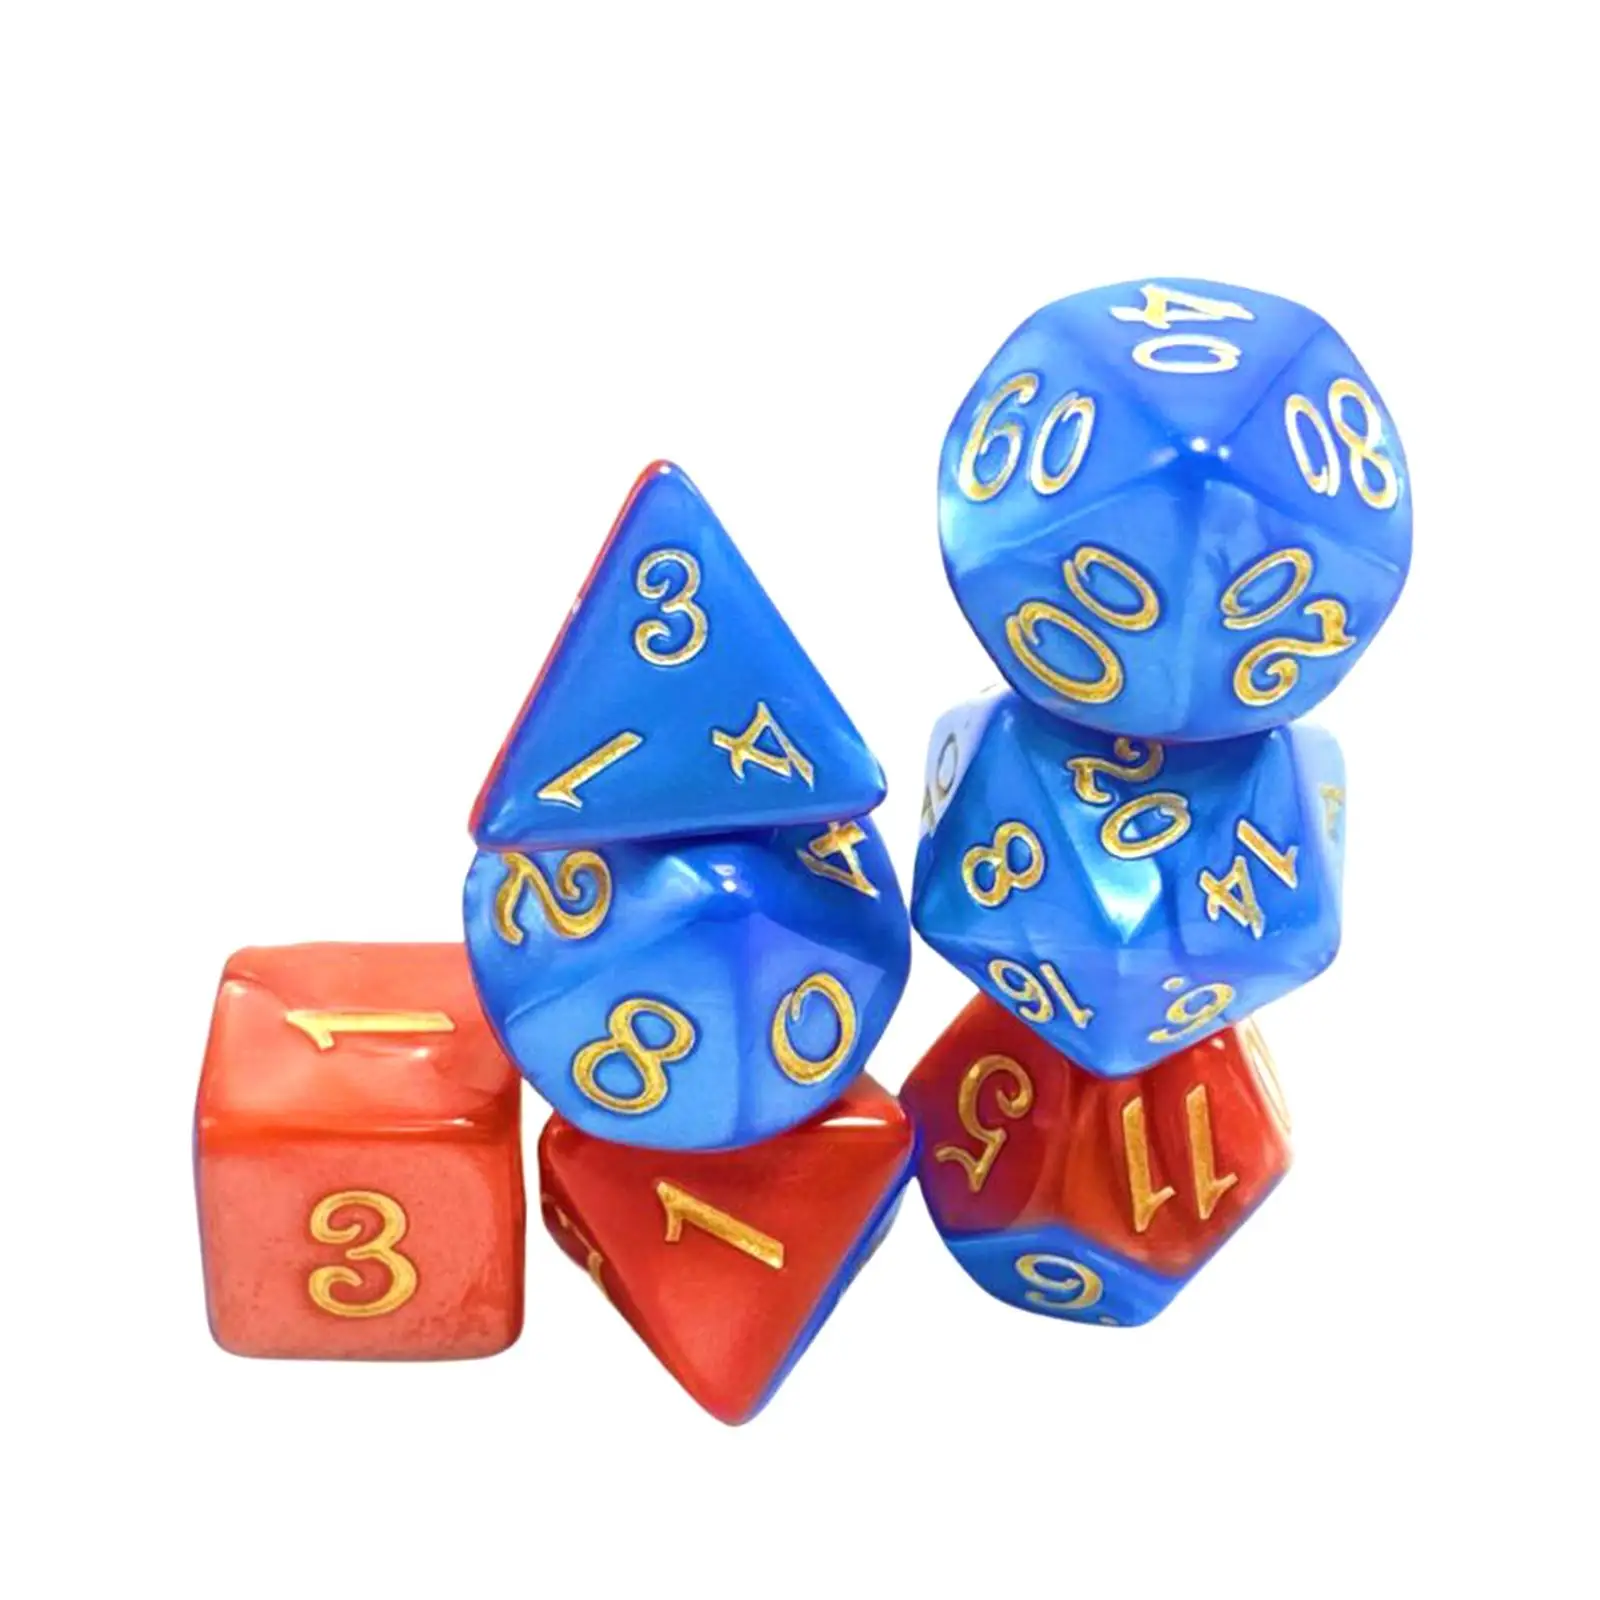 7 Pieces Polyhedral Dice Vivid Colors D4 and D6 D8 D10 D12 D20 for Party Favors Entertainment Toys Board Game Role Playing Gift